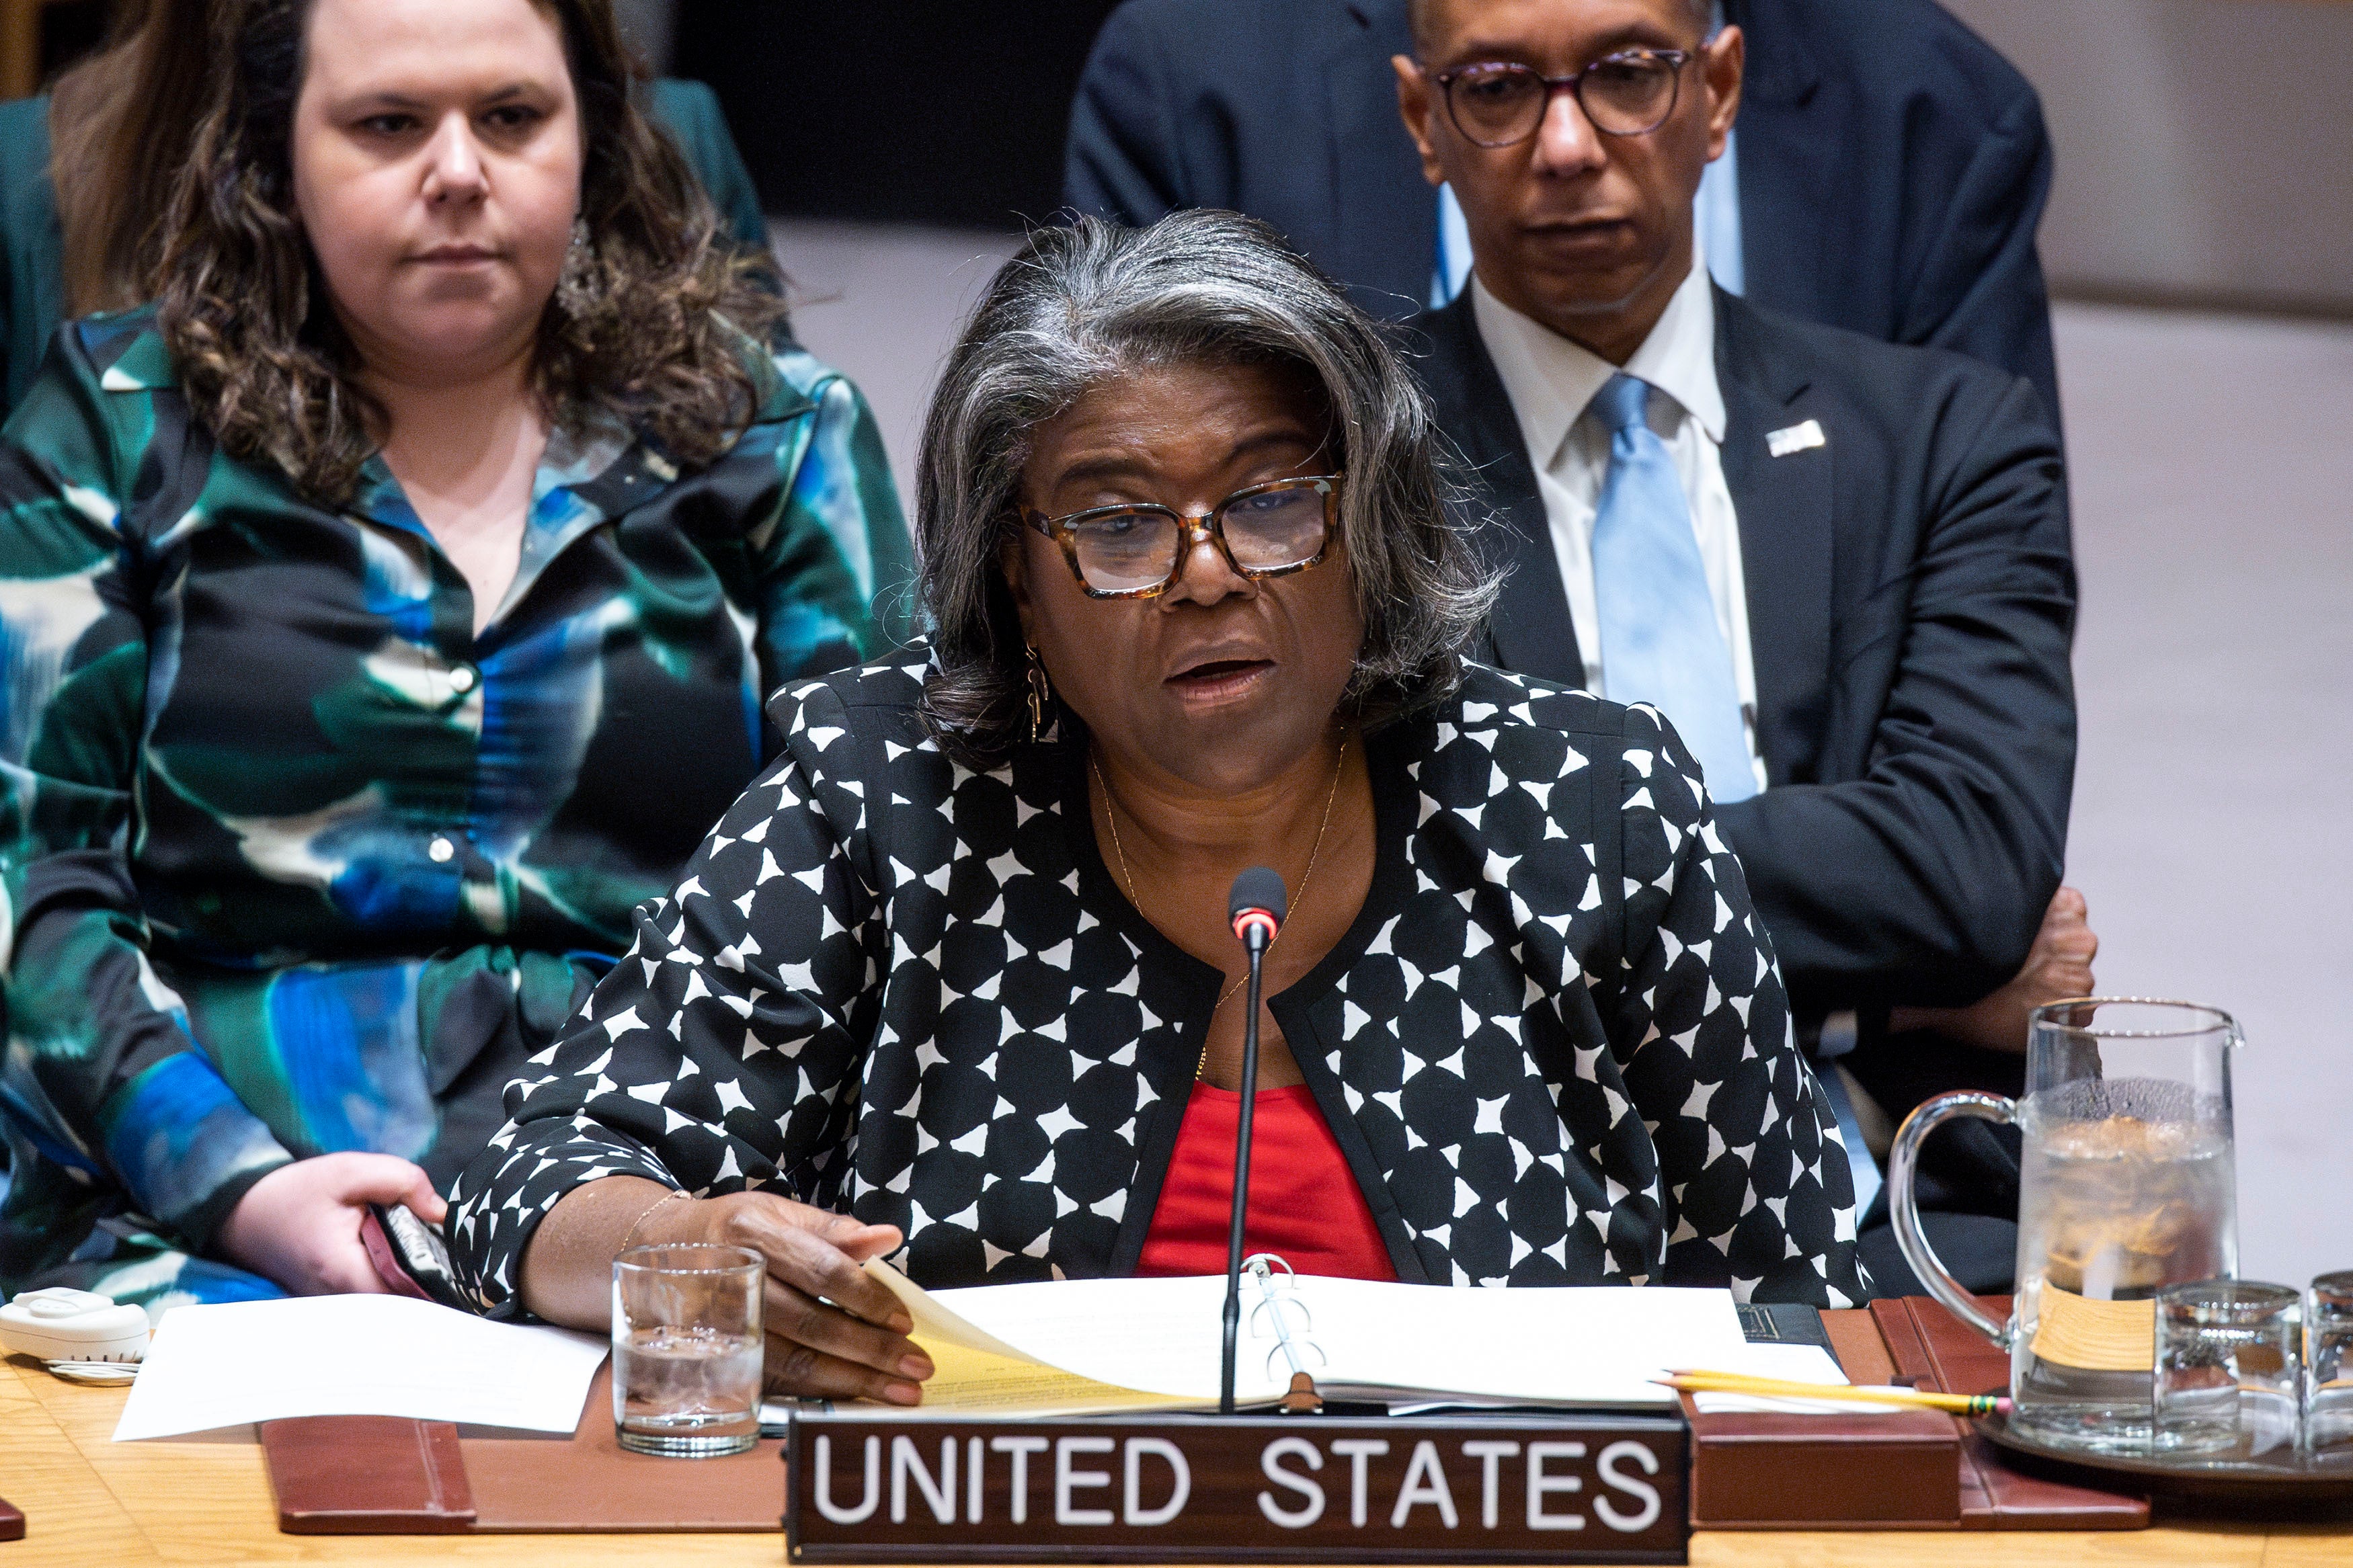 United States ambassador to the United Nations Linda Thomas-Greenfield addresses members of the UN Security Council in April at United Nations headquarters in New York